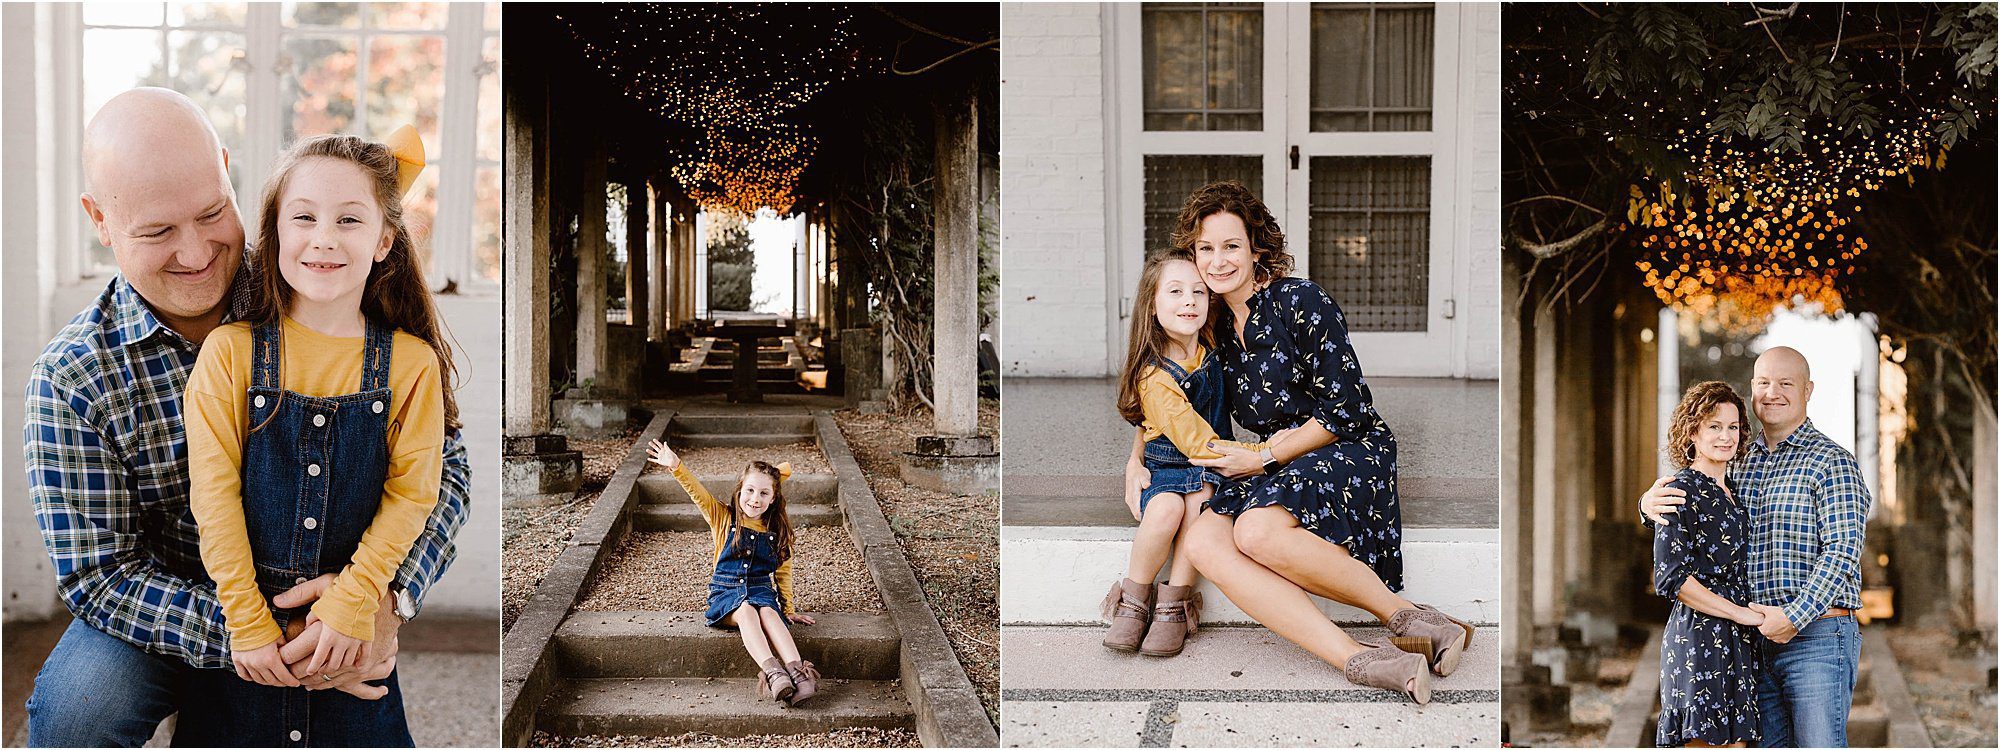 Intimate Family Photos at Bleak House Knoxville